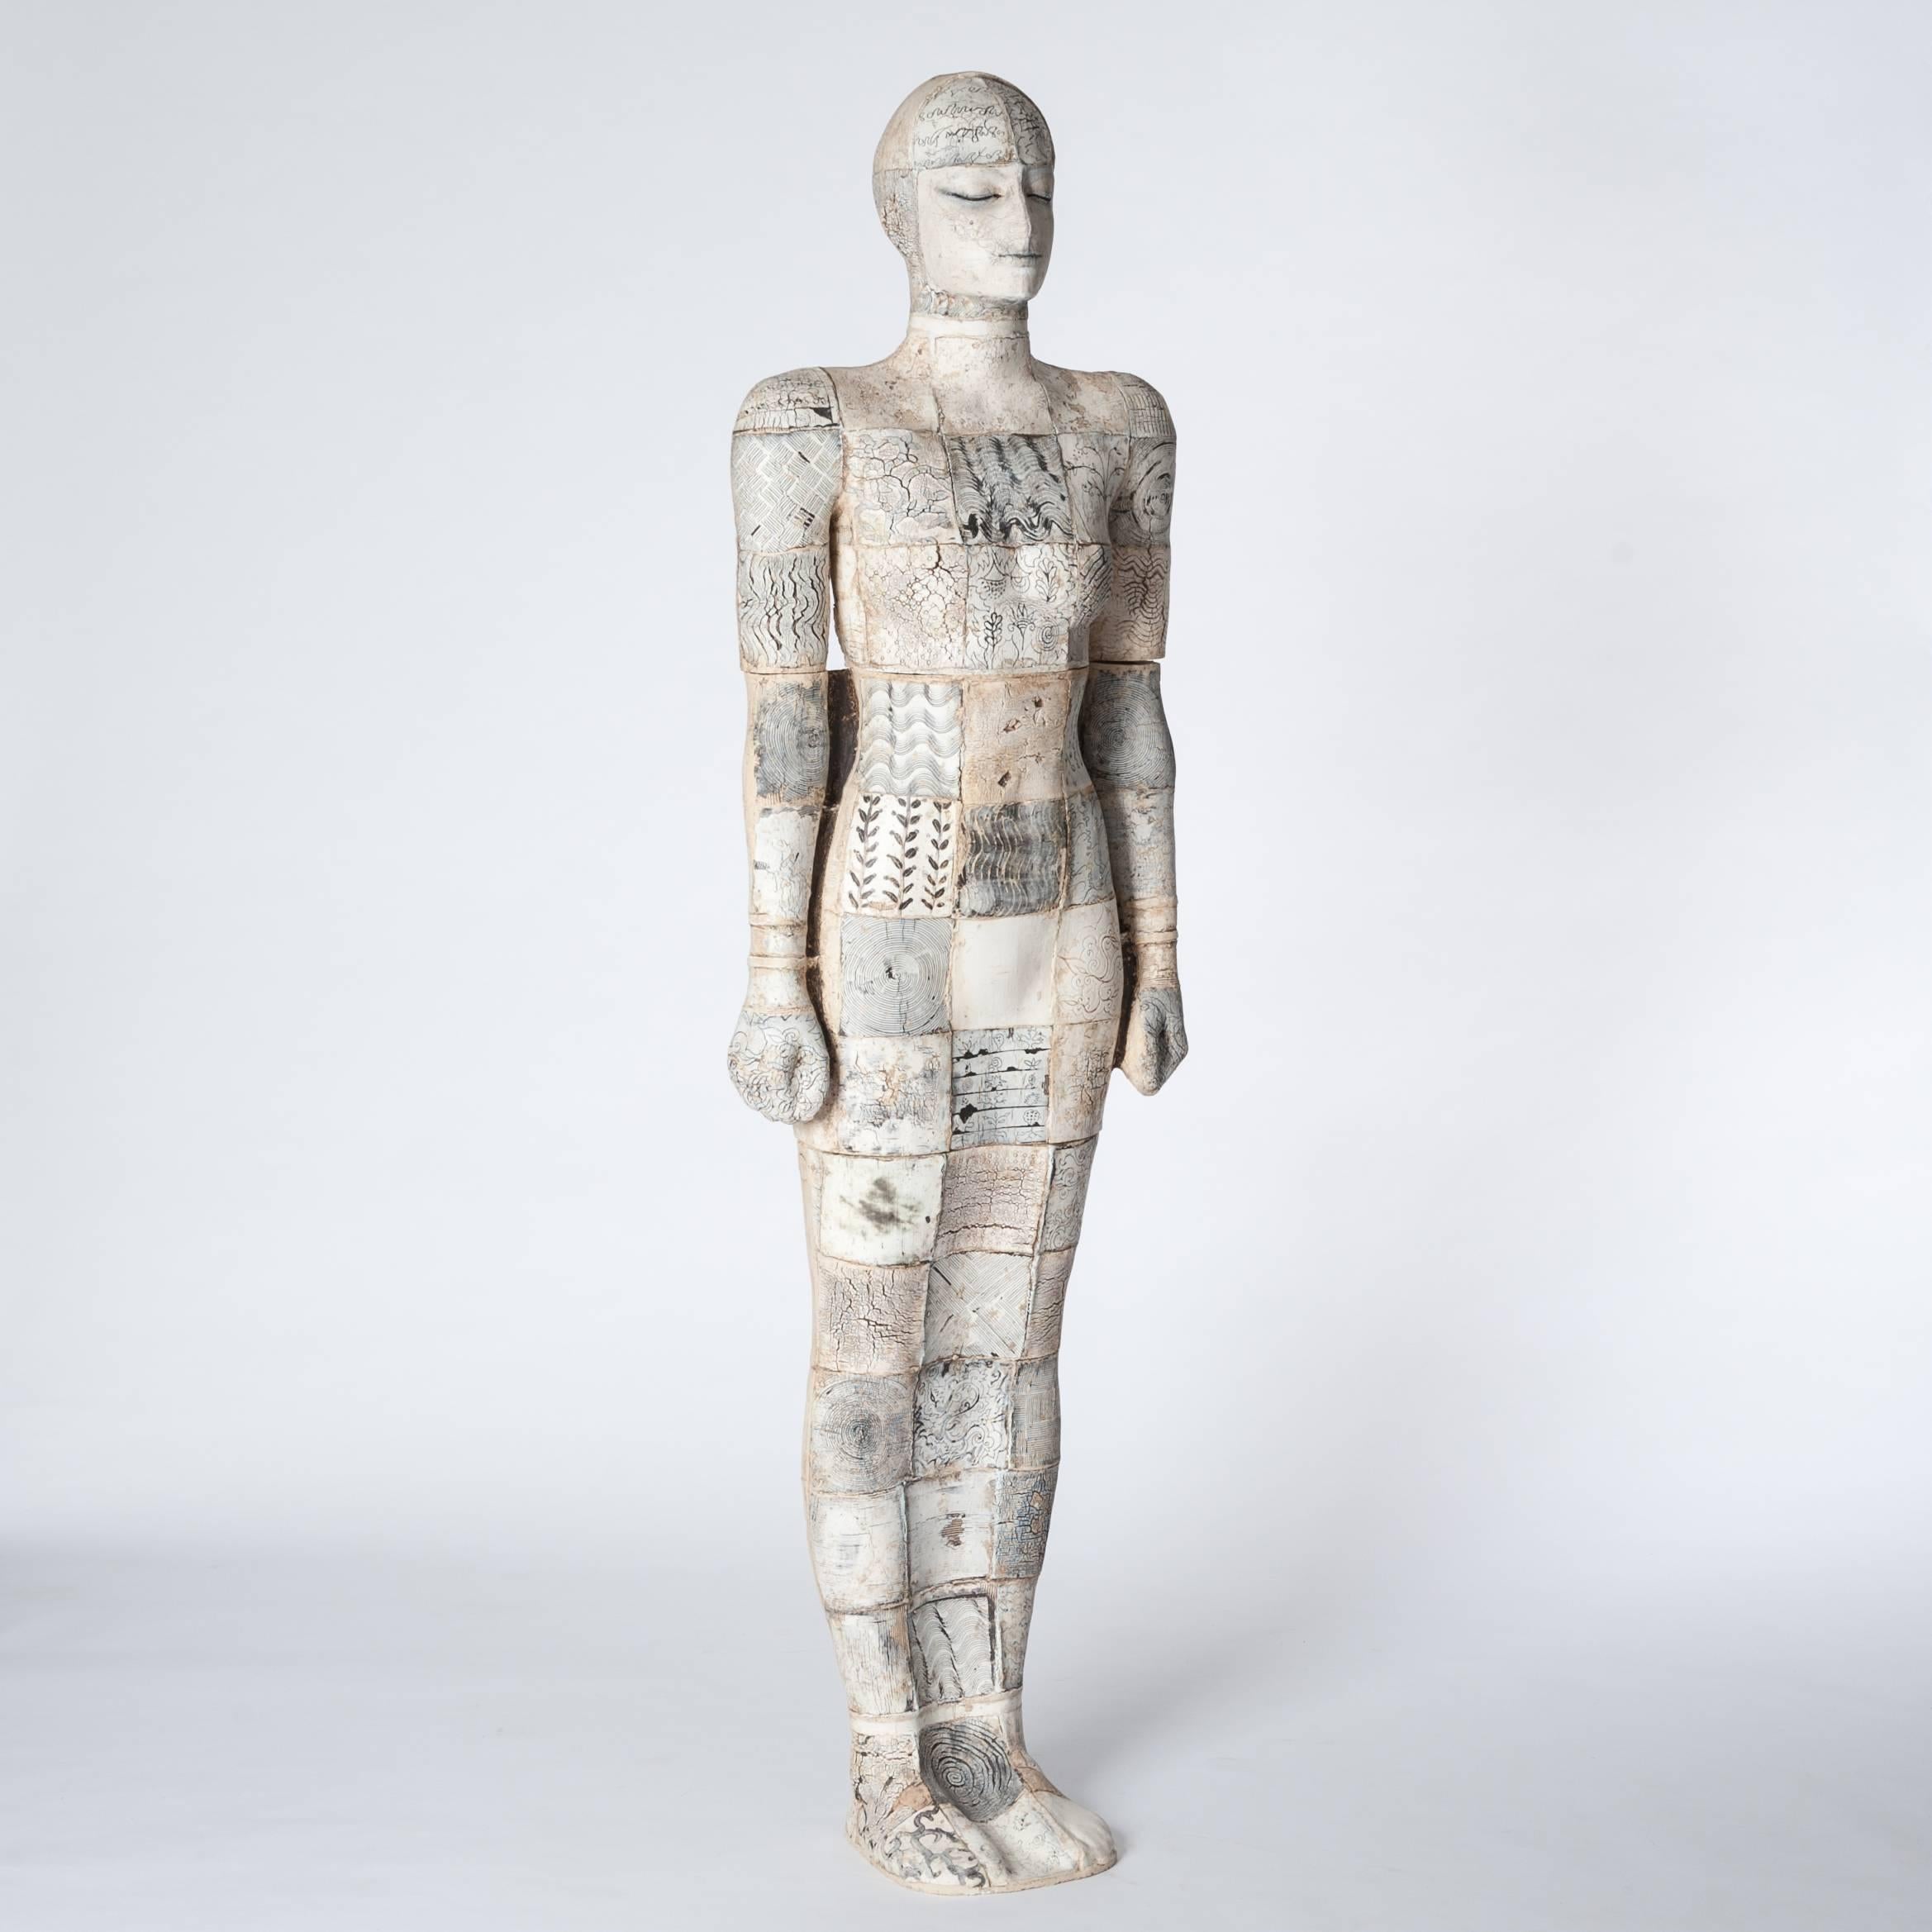 zeitlosnah (“timeless and close”) 
This series of lifesize female sculptures exuding a static aura of self-containment was created in 
2013-2014. 
Height: 182 cm. 
The sculptures show minimal variations in their bodies, postures and facial